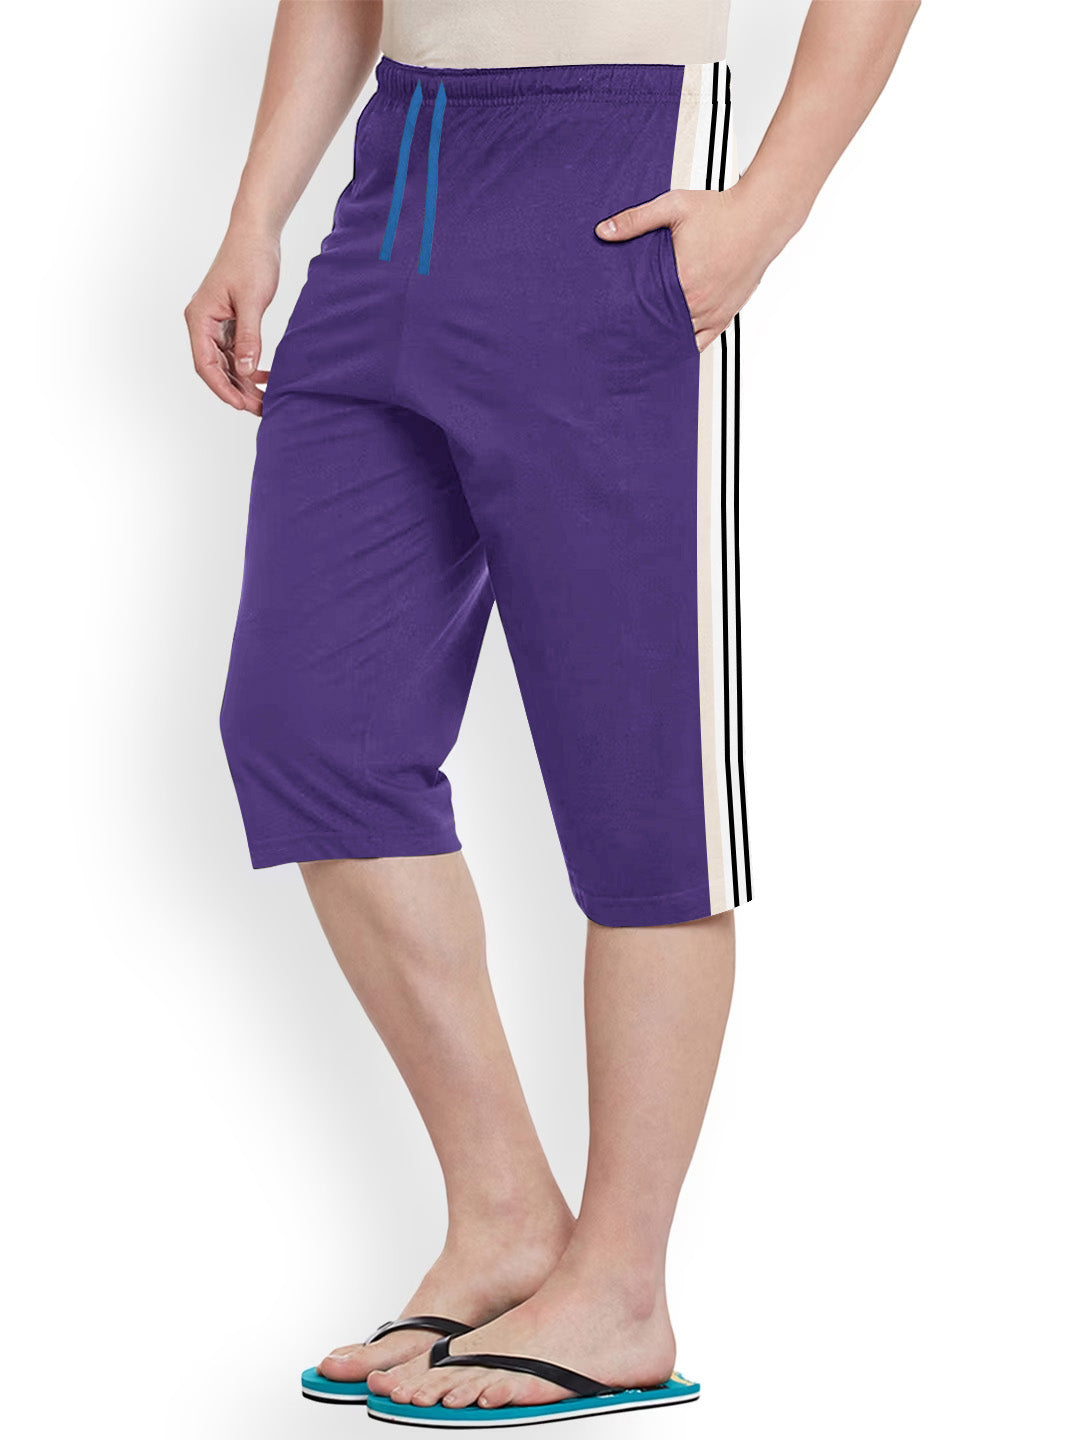 Next Single Jersey Lounge Short For Men-Purple with Stripe-BE982